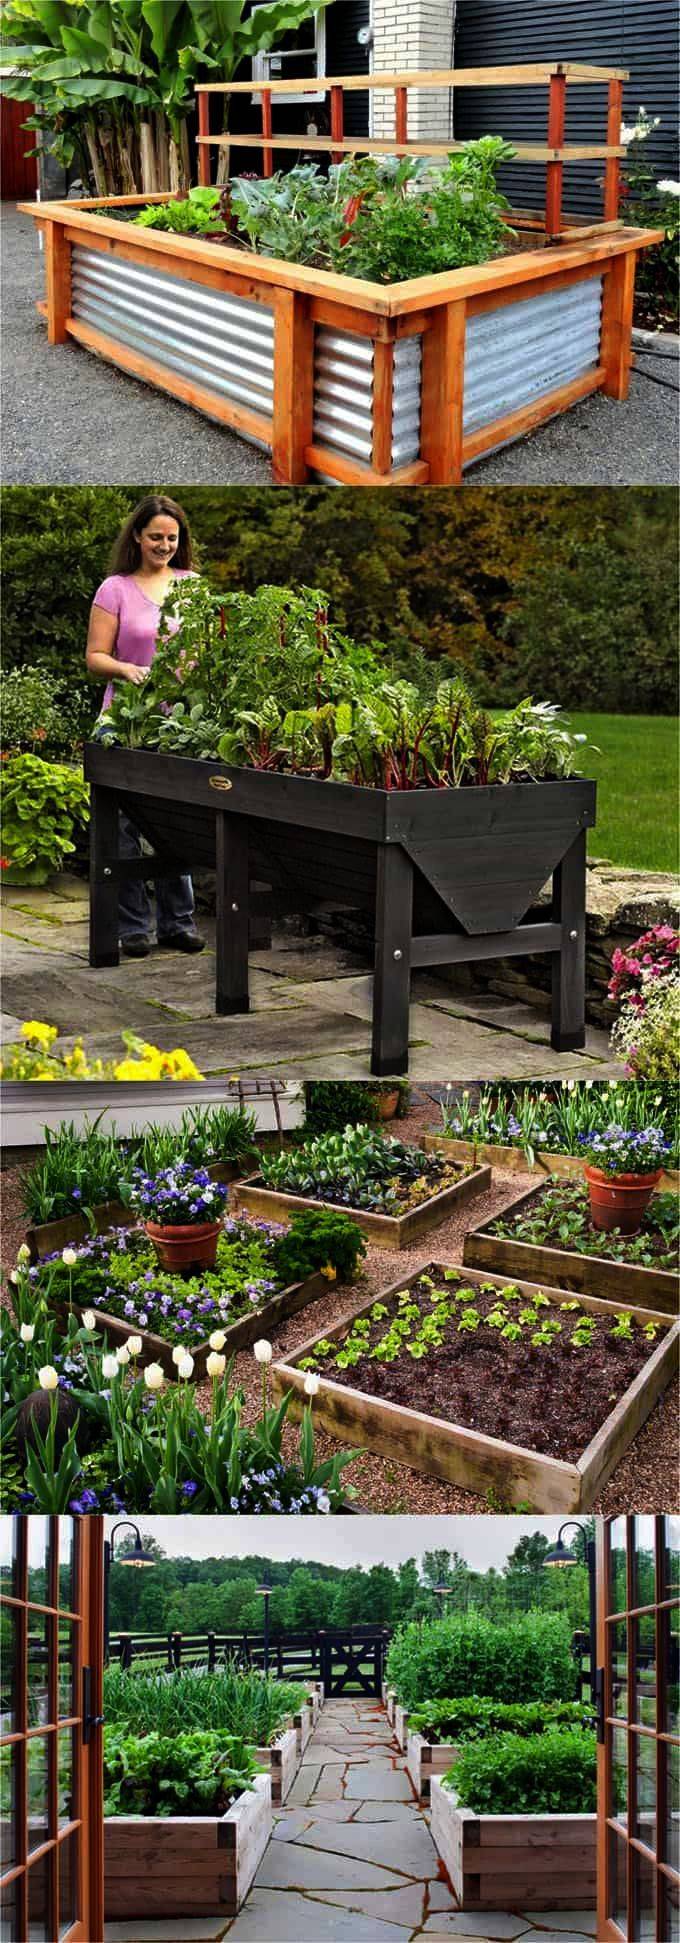 A Raised Wooden Flower Bed